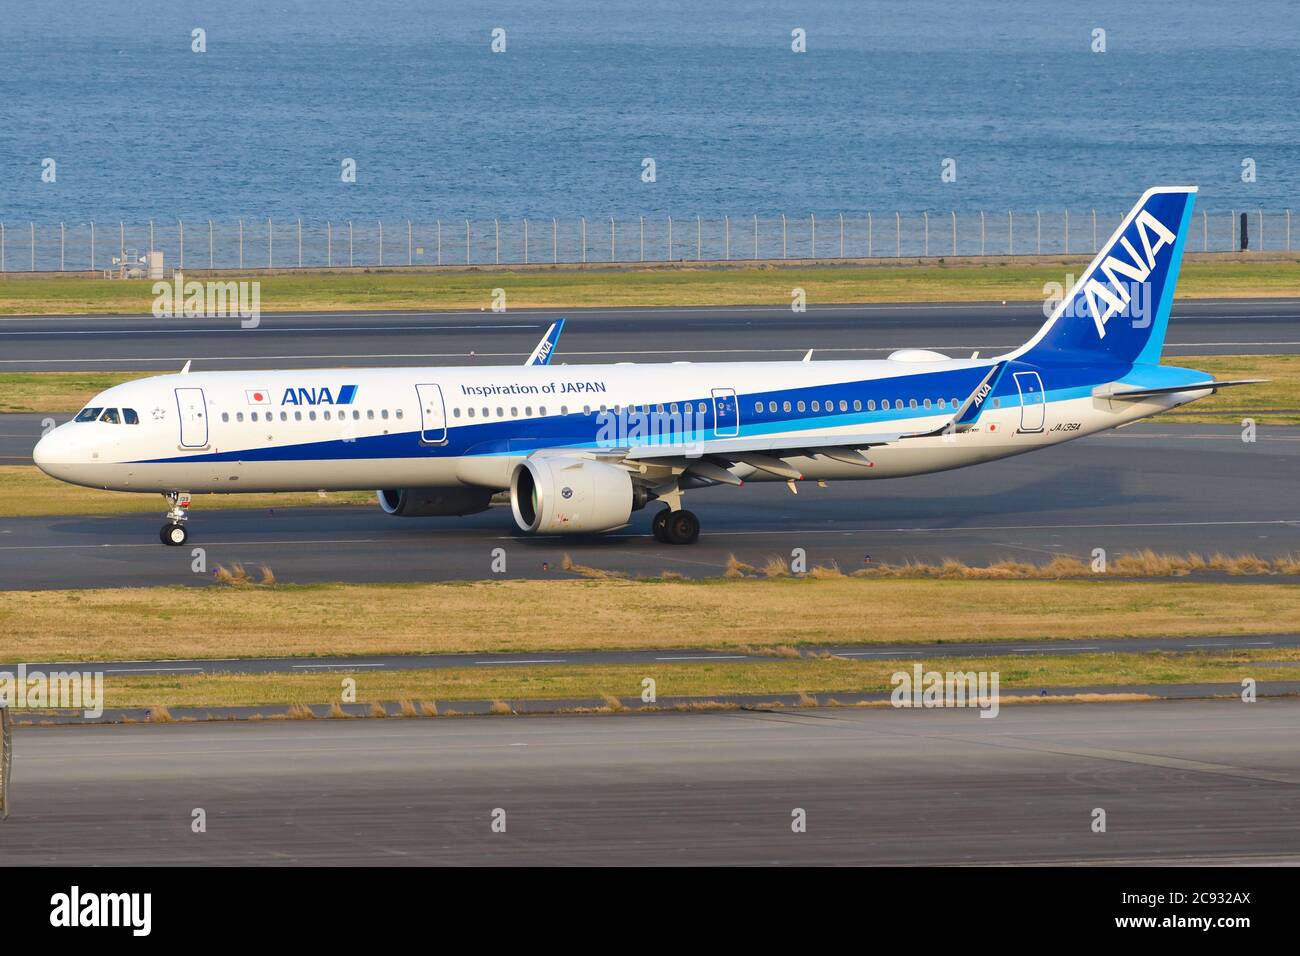 All Nippon Airways Ana Airbus A321 Neo Taxiing At Tokyo Haneda Airport Aircraft Of Airline From Japan Registered As Ja139a Stock Photo Alamy